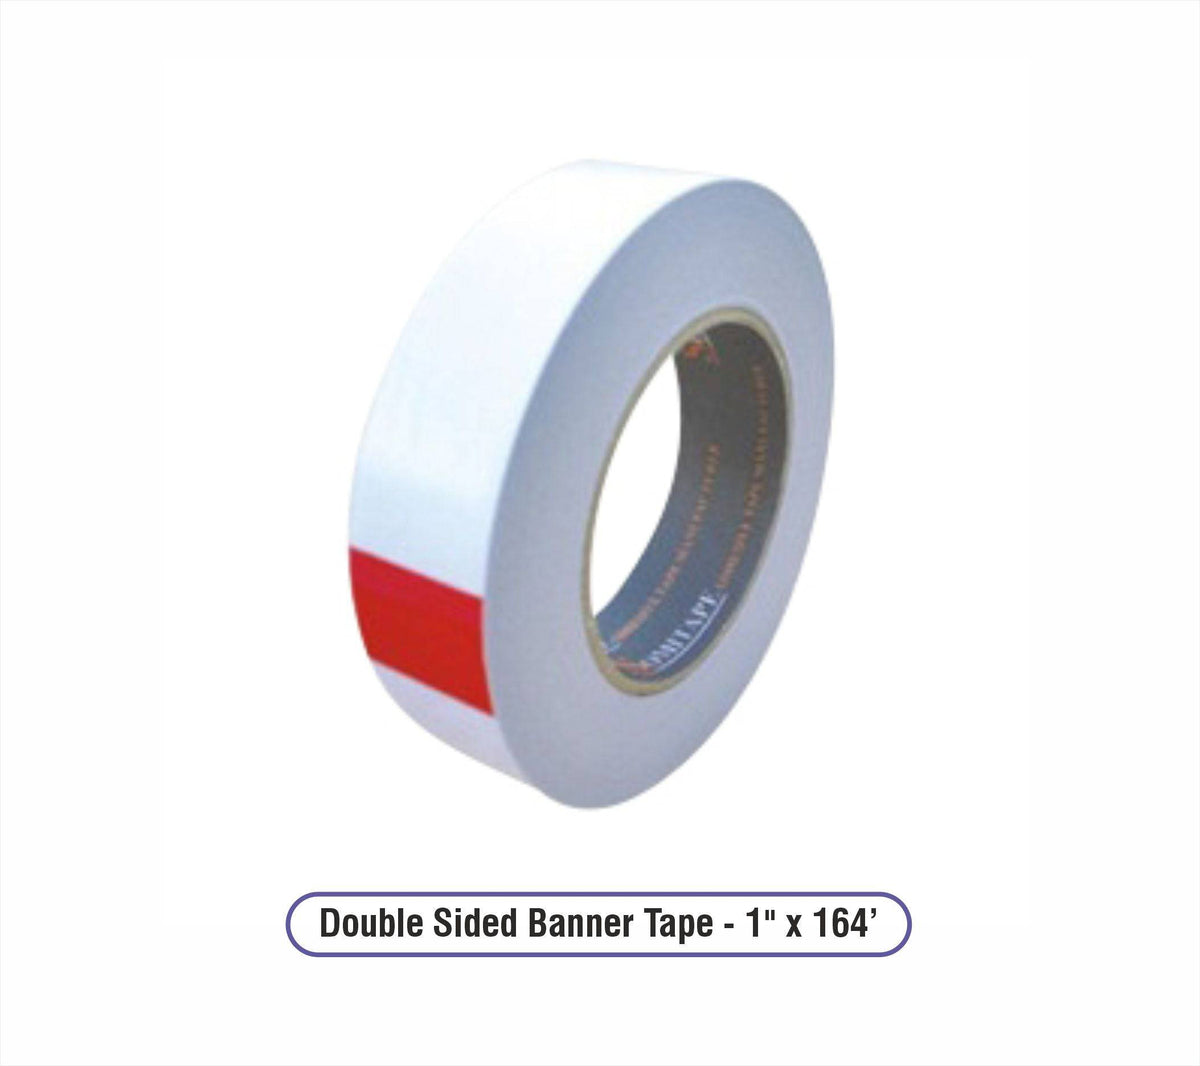 Double Sided Banner Tape - 1" x 164’ - PrintBanners